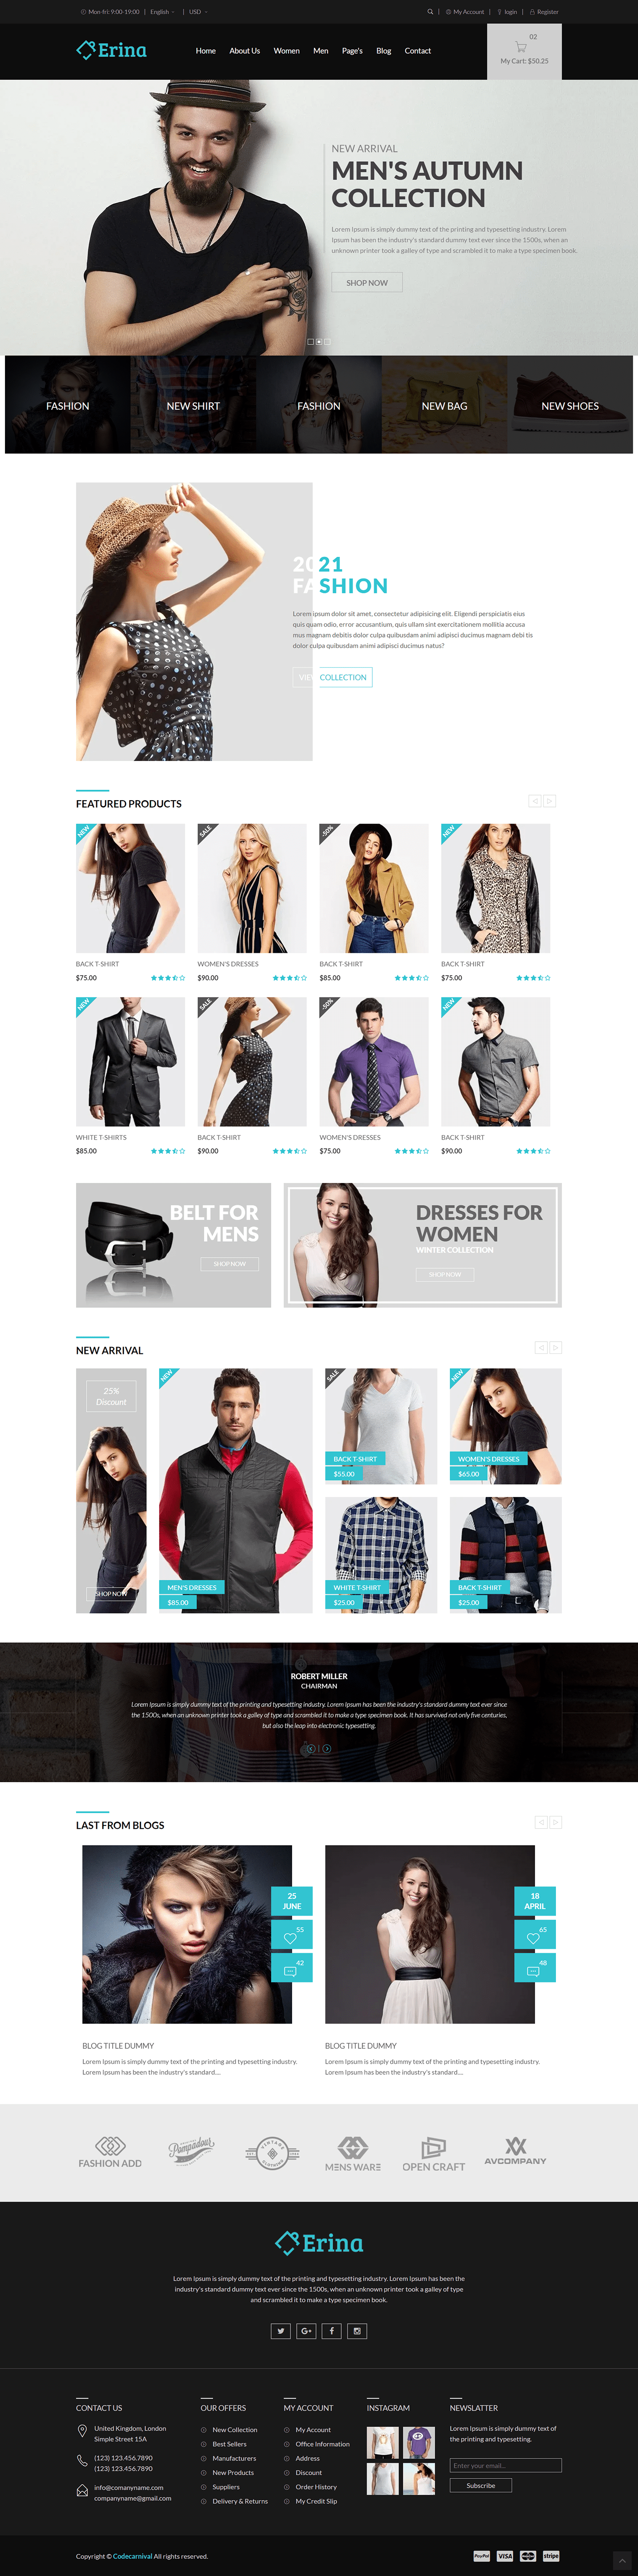 bootstrap html template bootstrap web template ecommerce web template elegant html template Fashion Store Template modern html template online shop template online store templare responsive web template urban fashion template